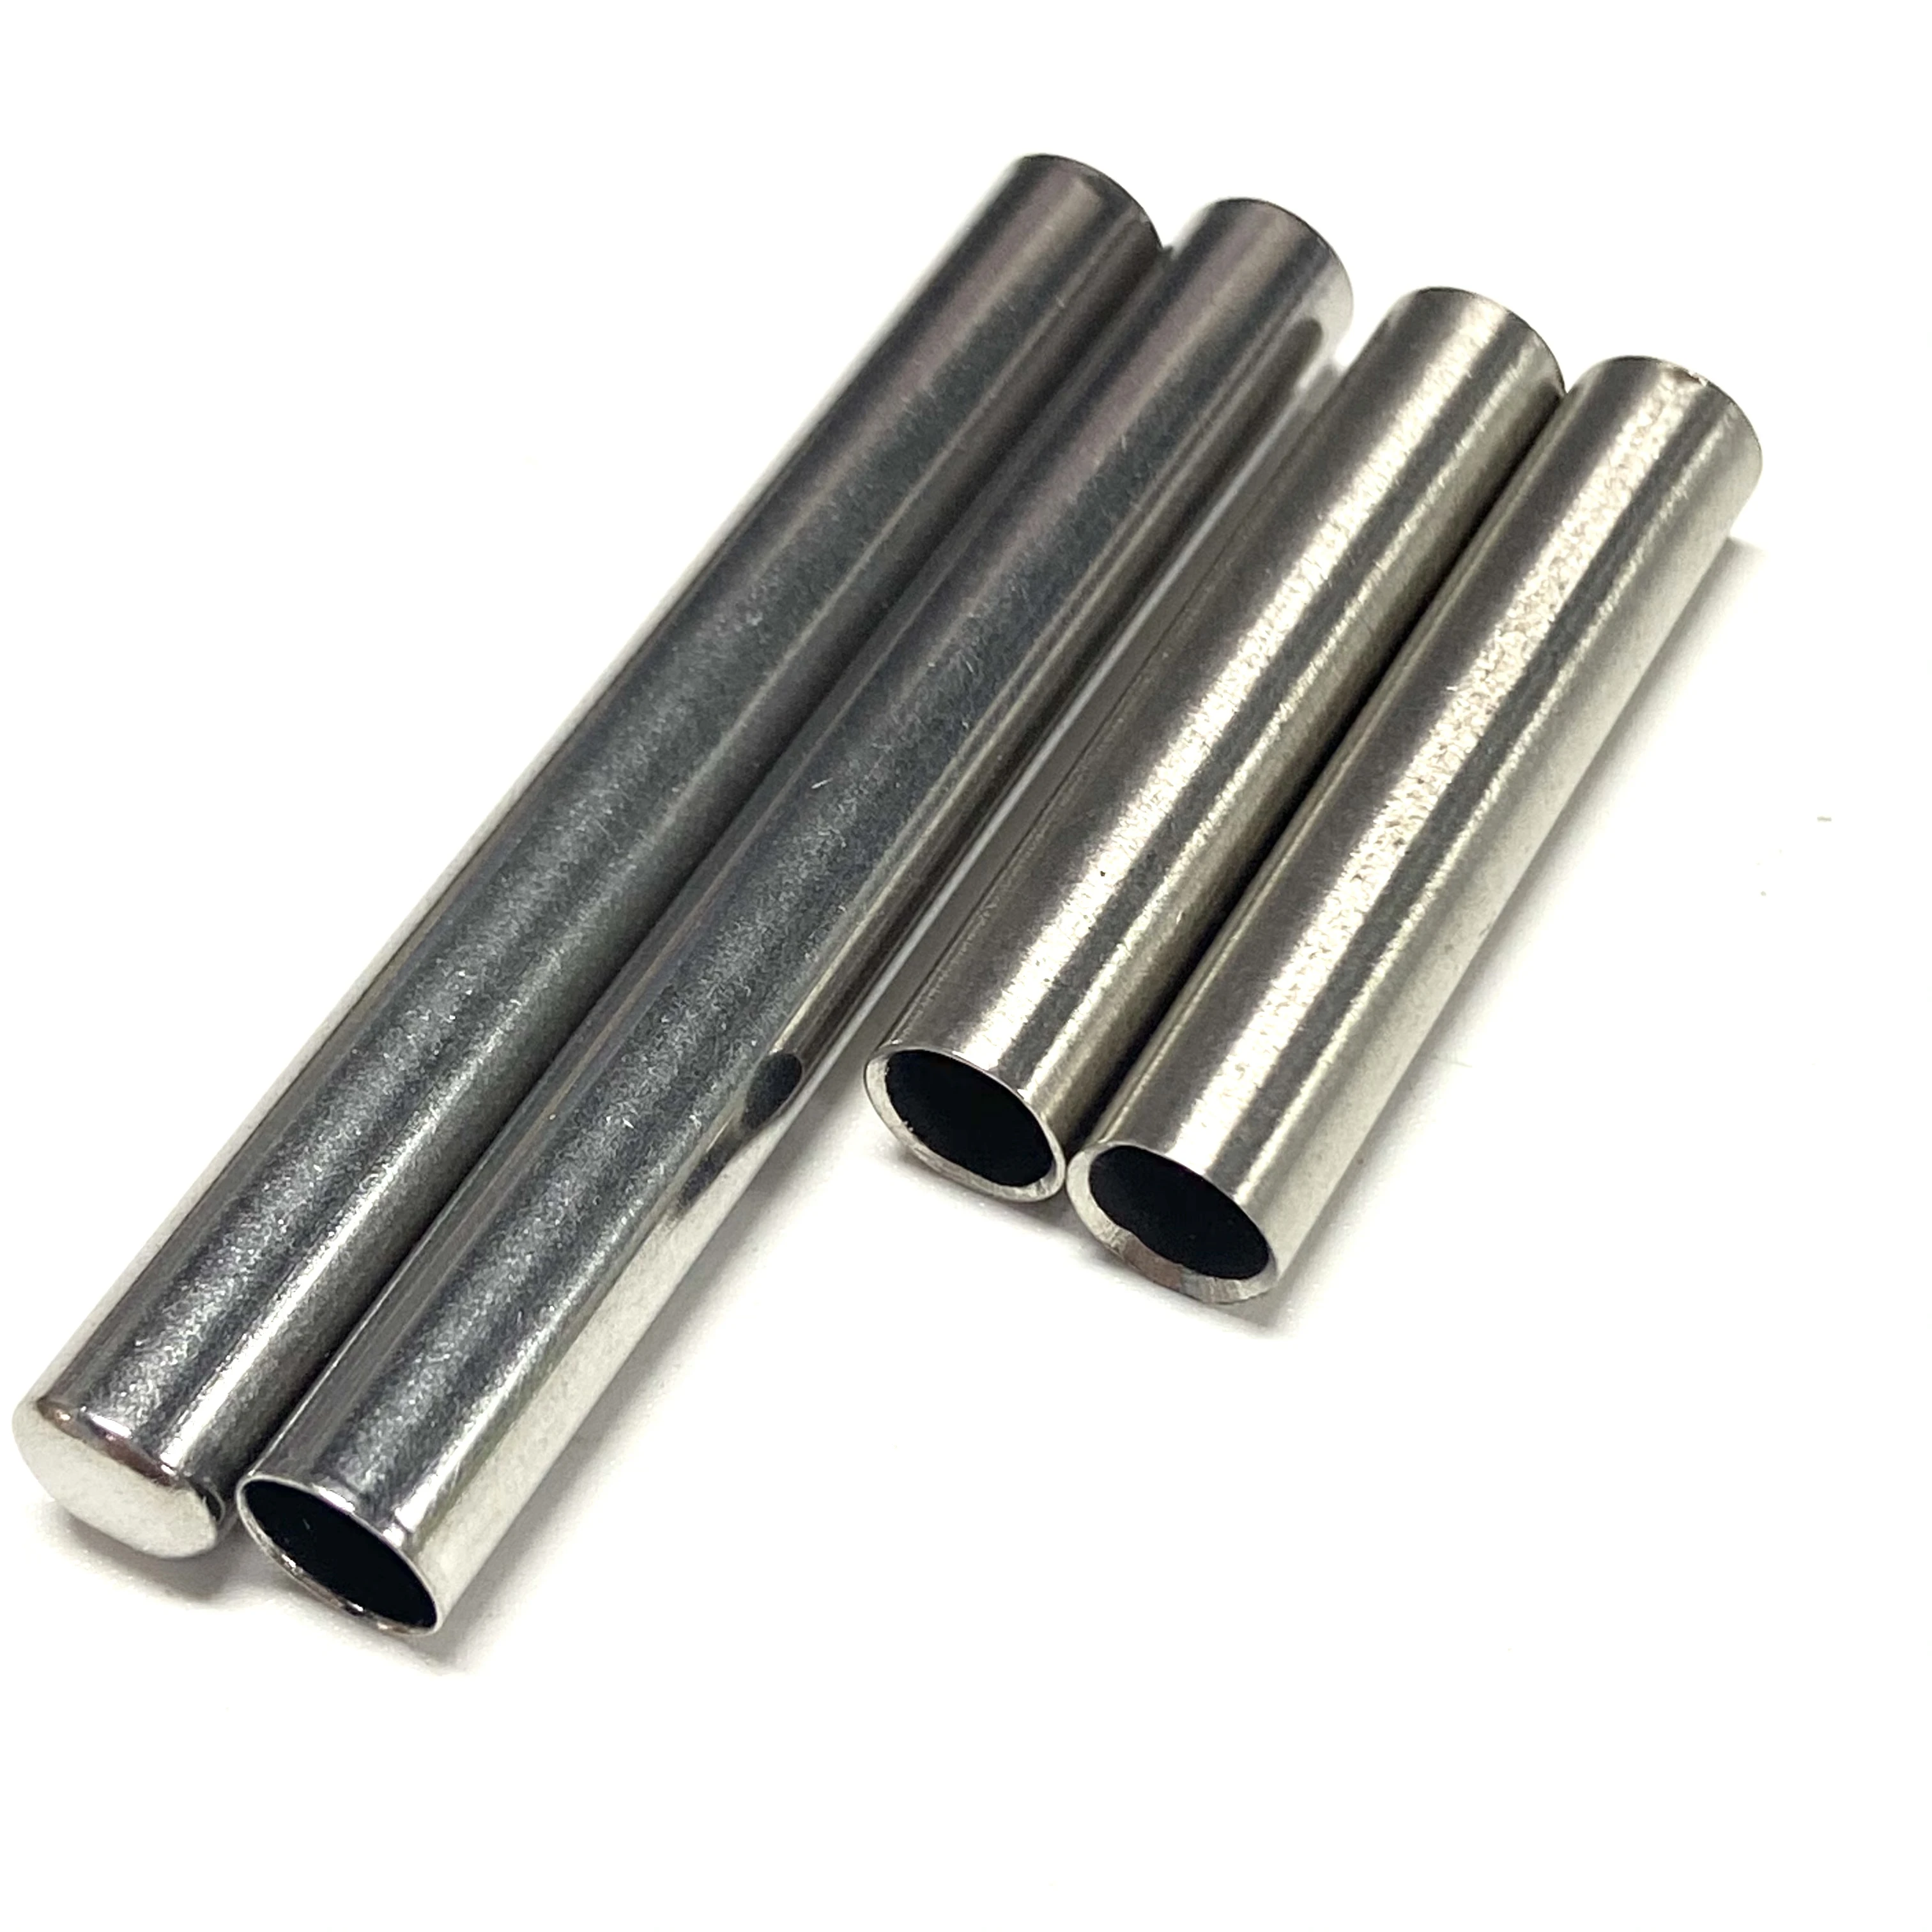 

5pcs/lot PT100 DS18B20 Stainless Temperature Sensor Steel Casing pipes Protective sleeve 6*50mm 6*30mm